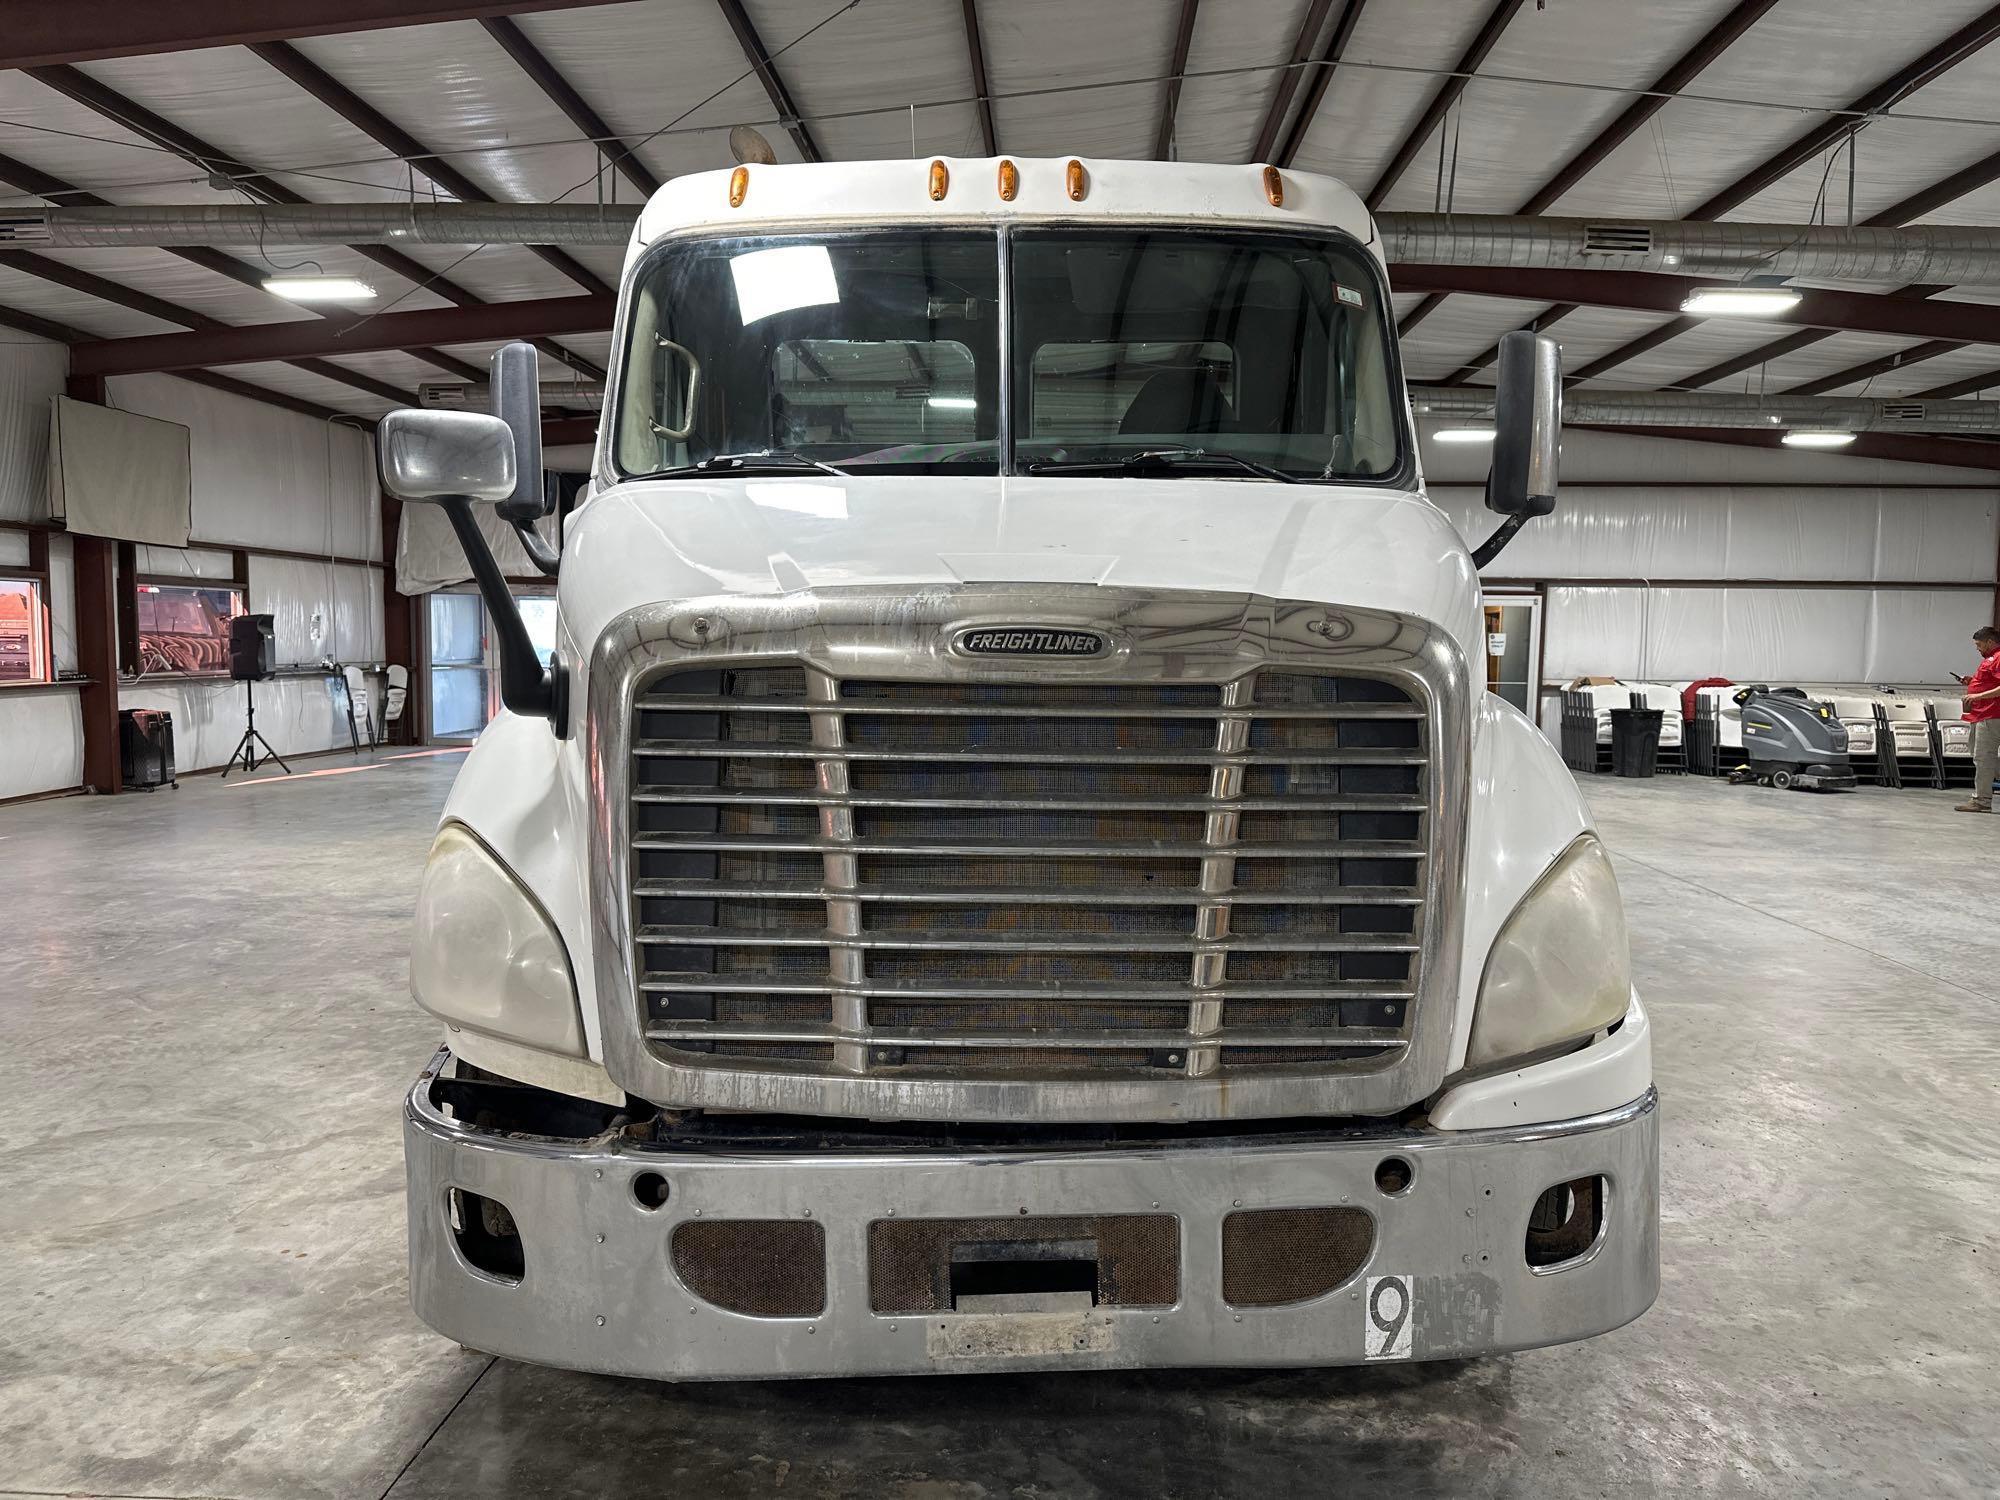 2016 Freightliner Cascadia 113 Day Cab Truck Tractor